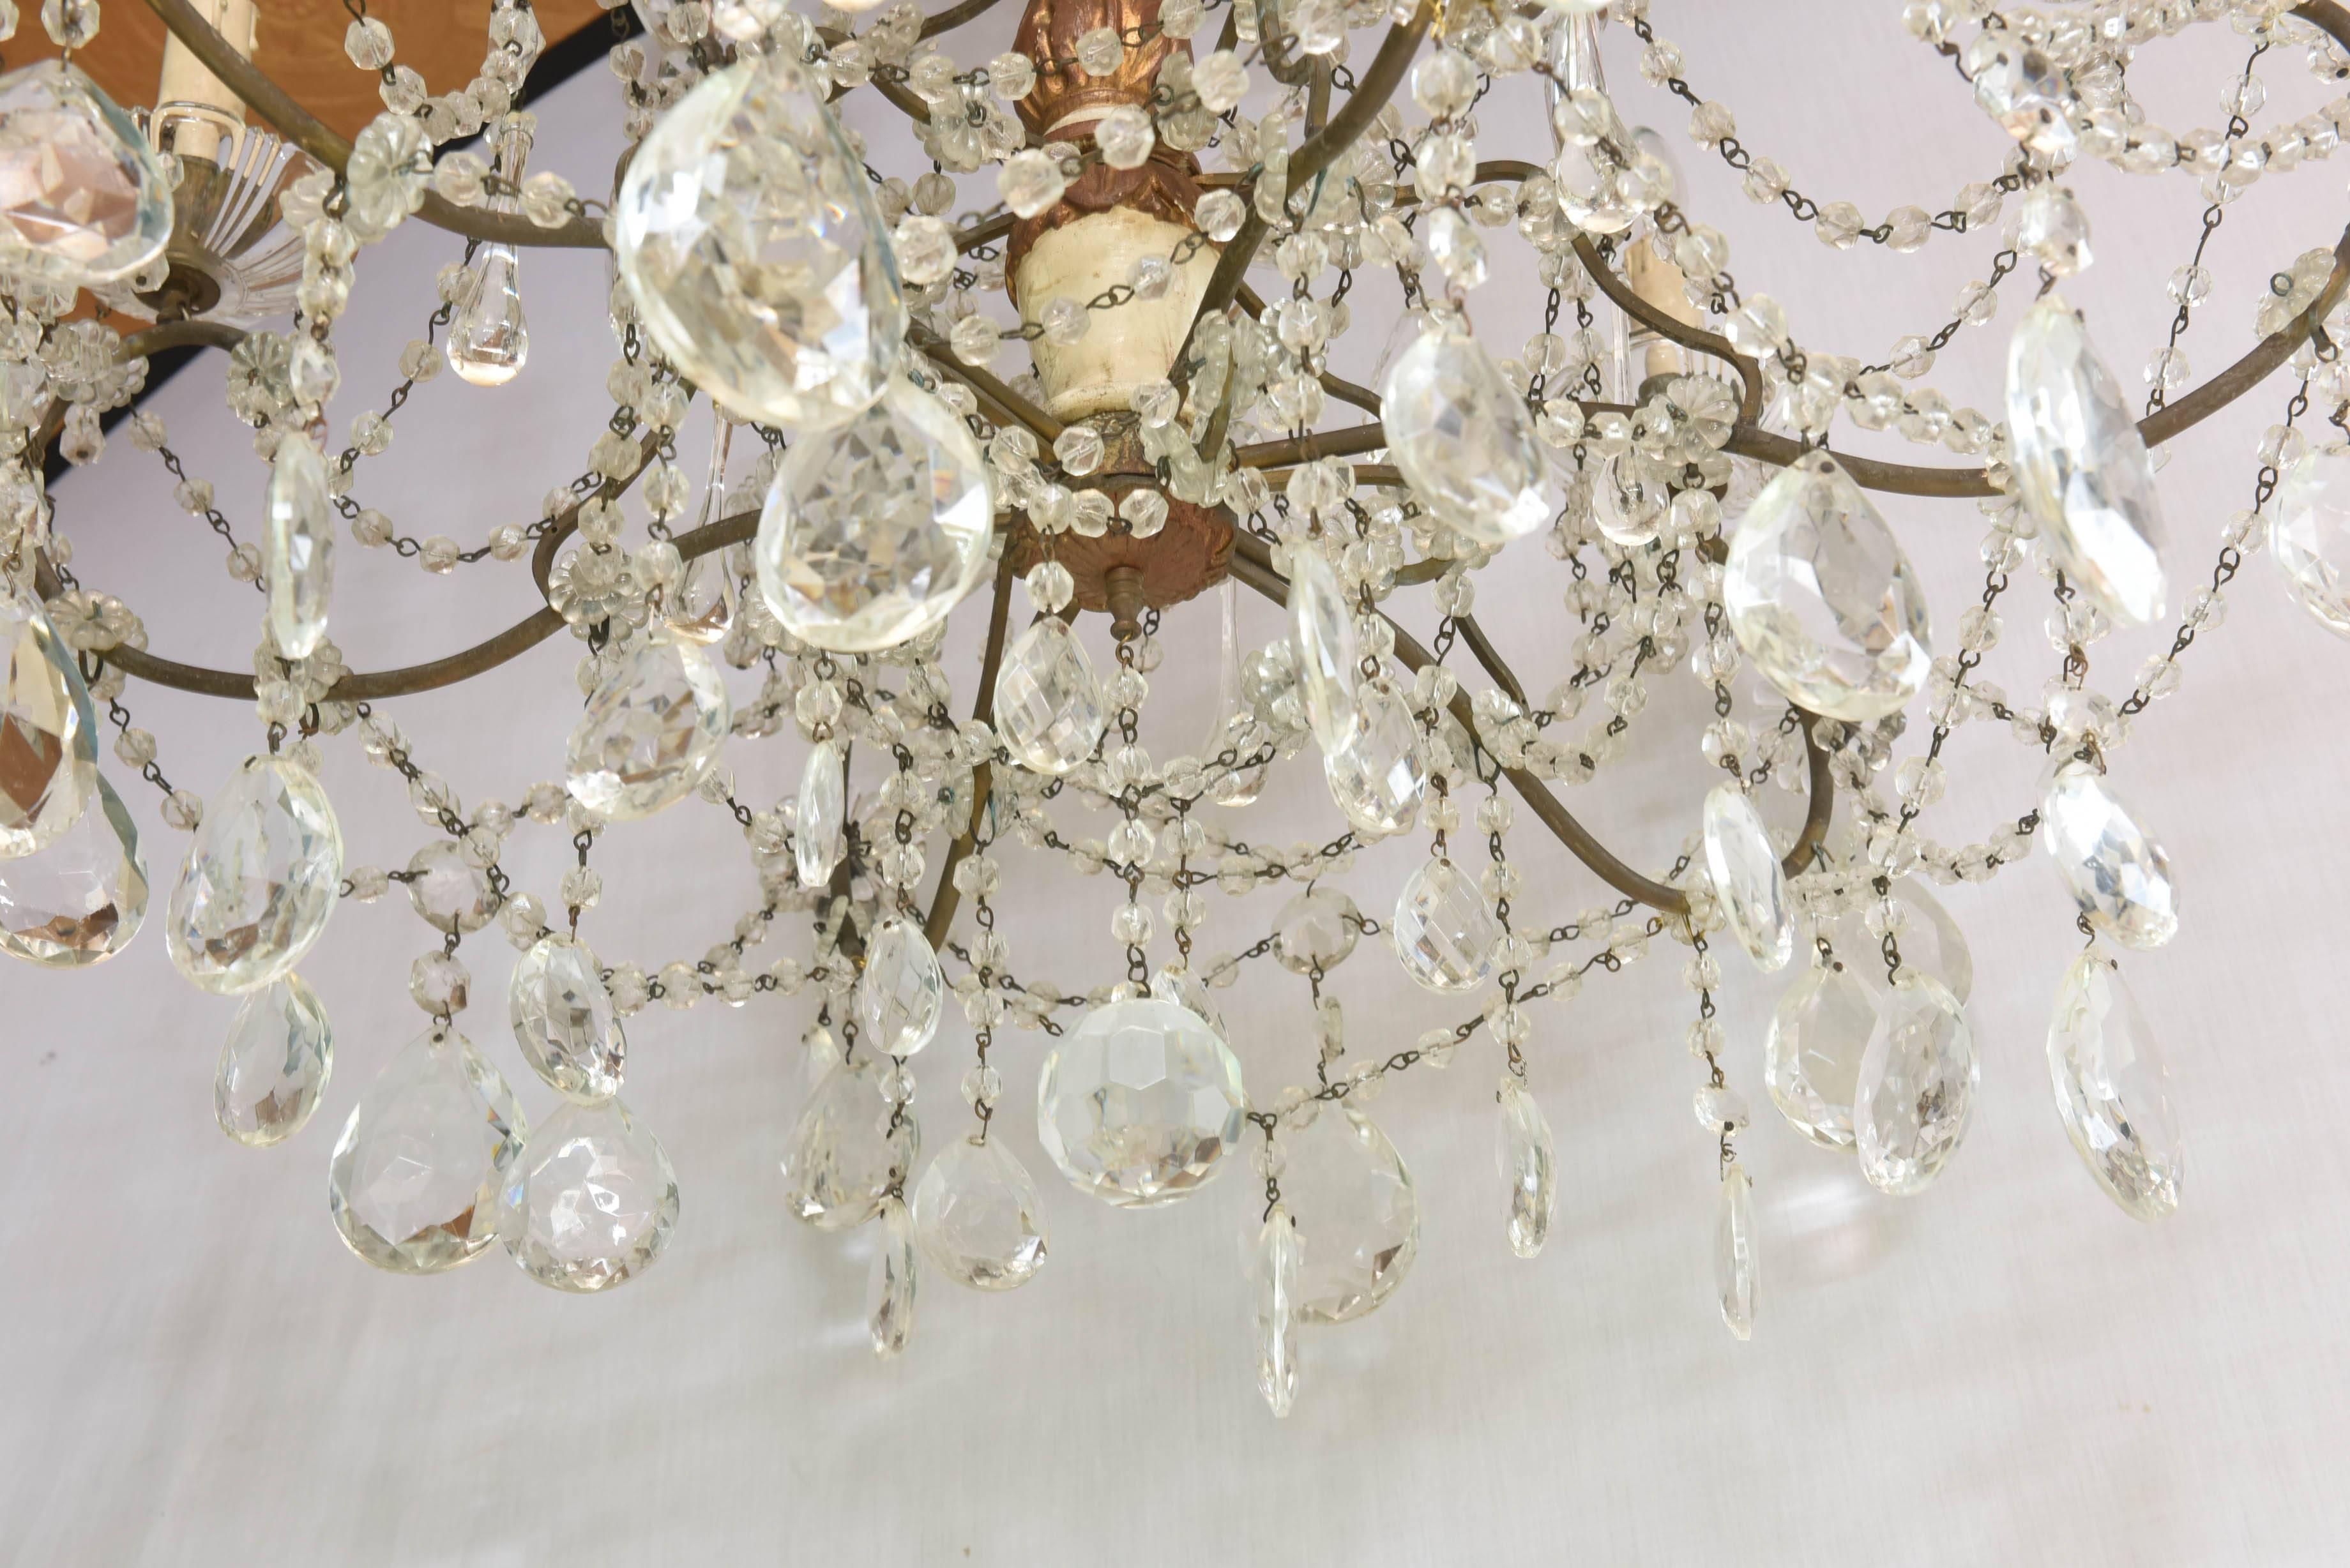 19th Century Italian Pricket Chandelier Draped in Crystal Beads For Sale 3